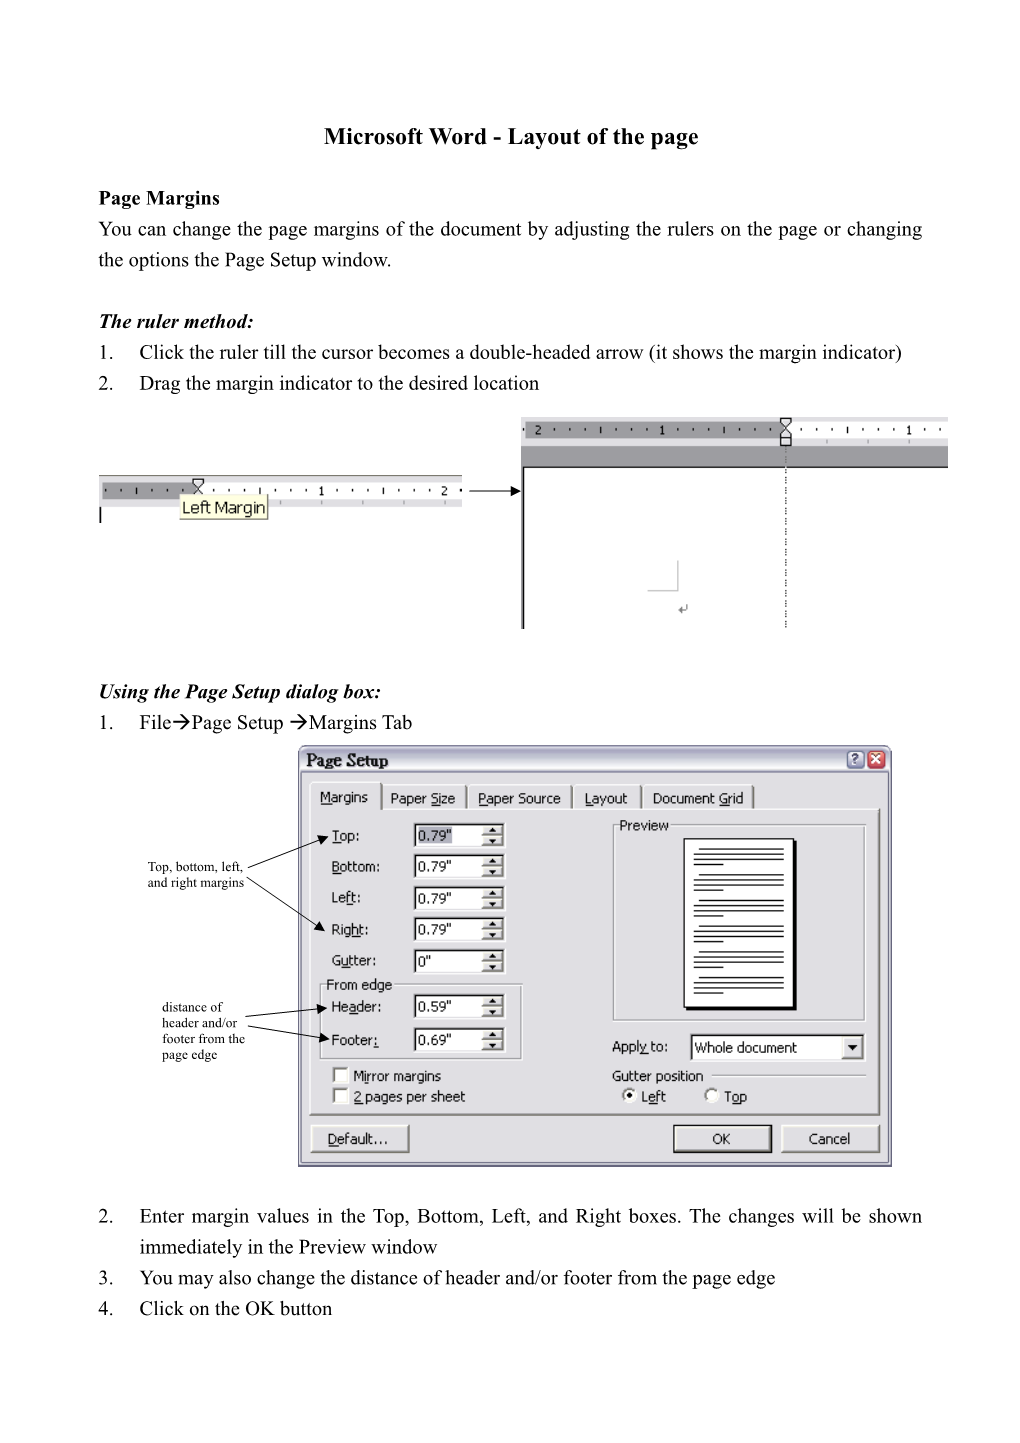 Microsoft Word - Layout of the Page